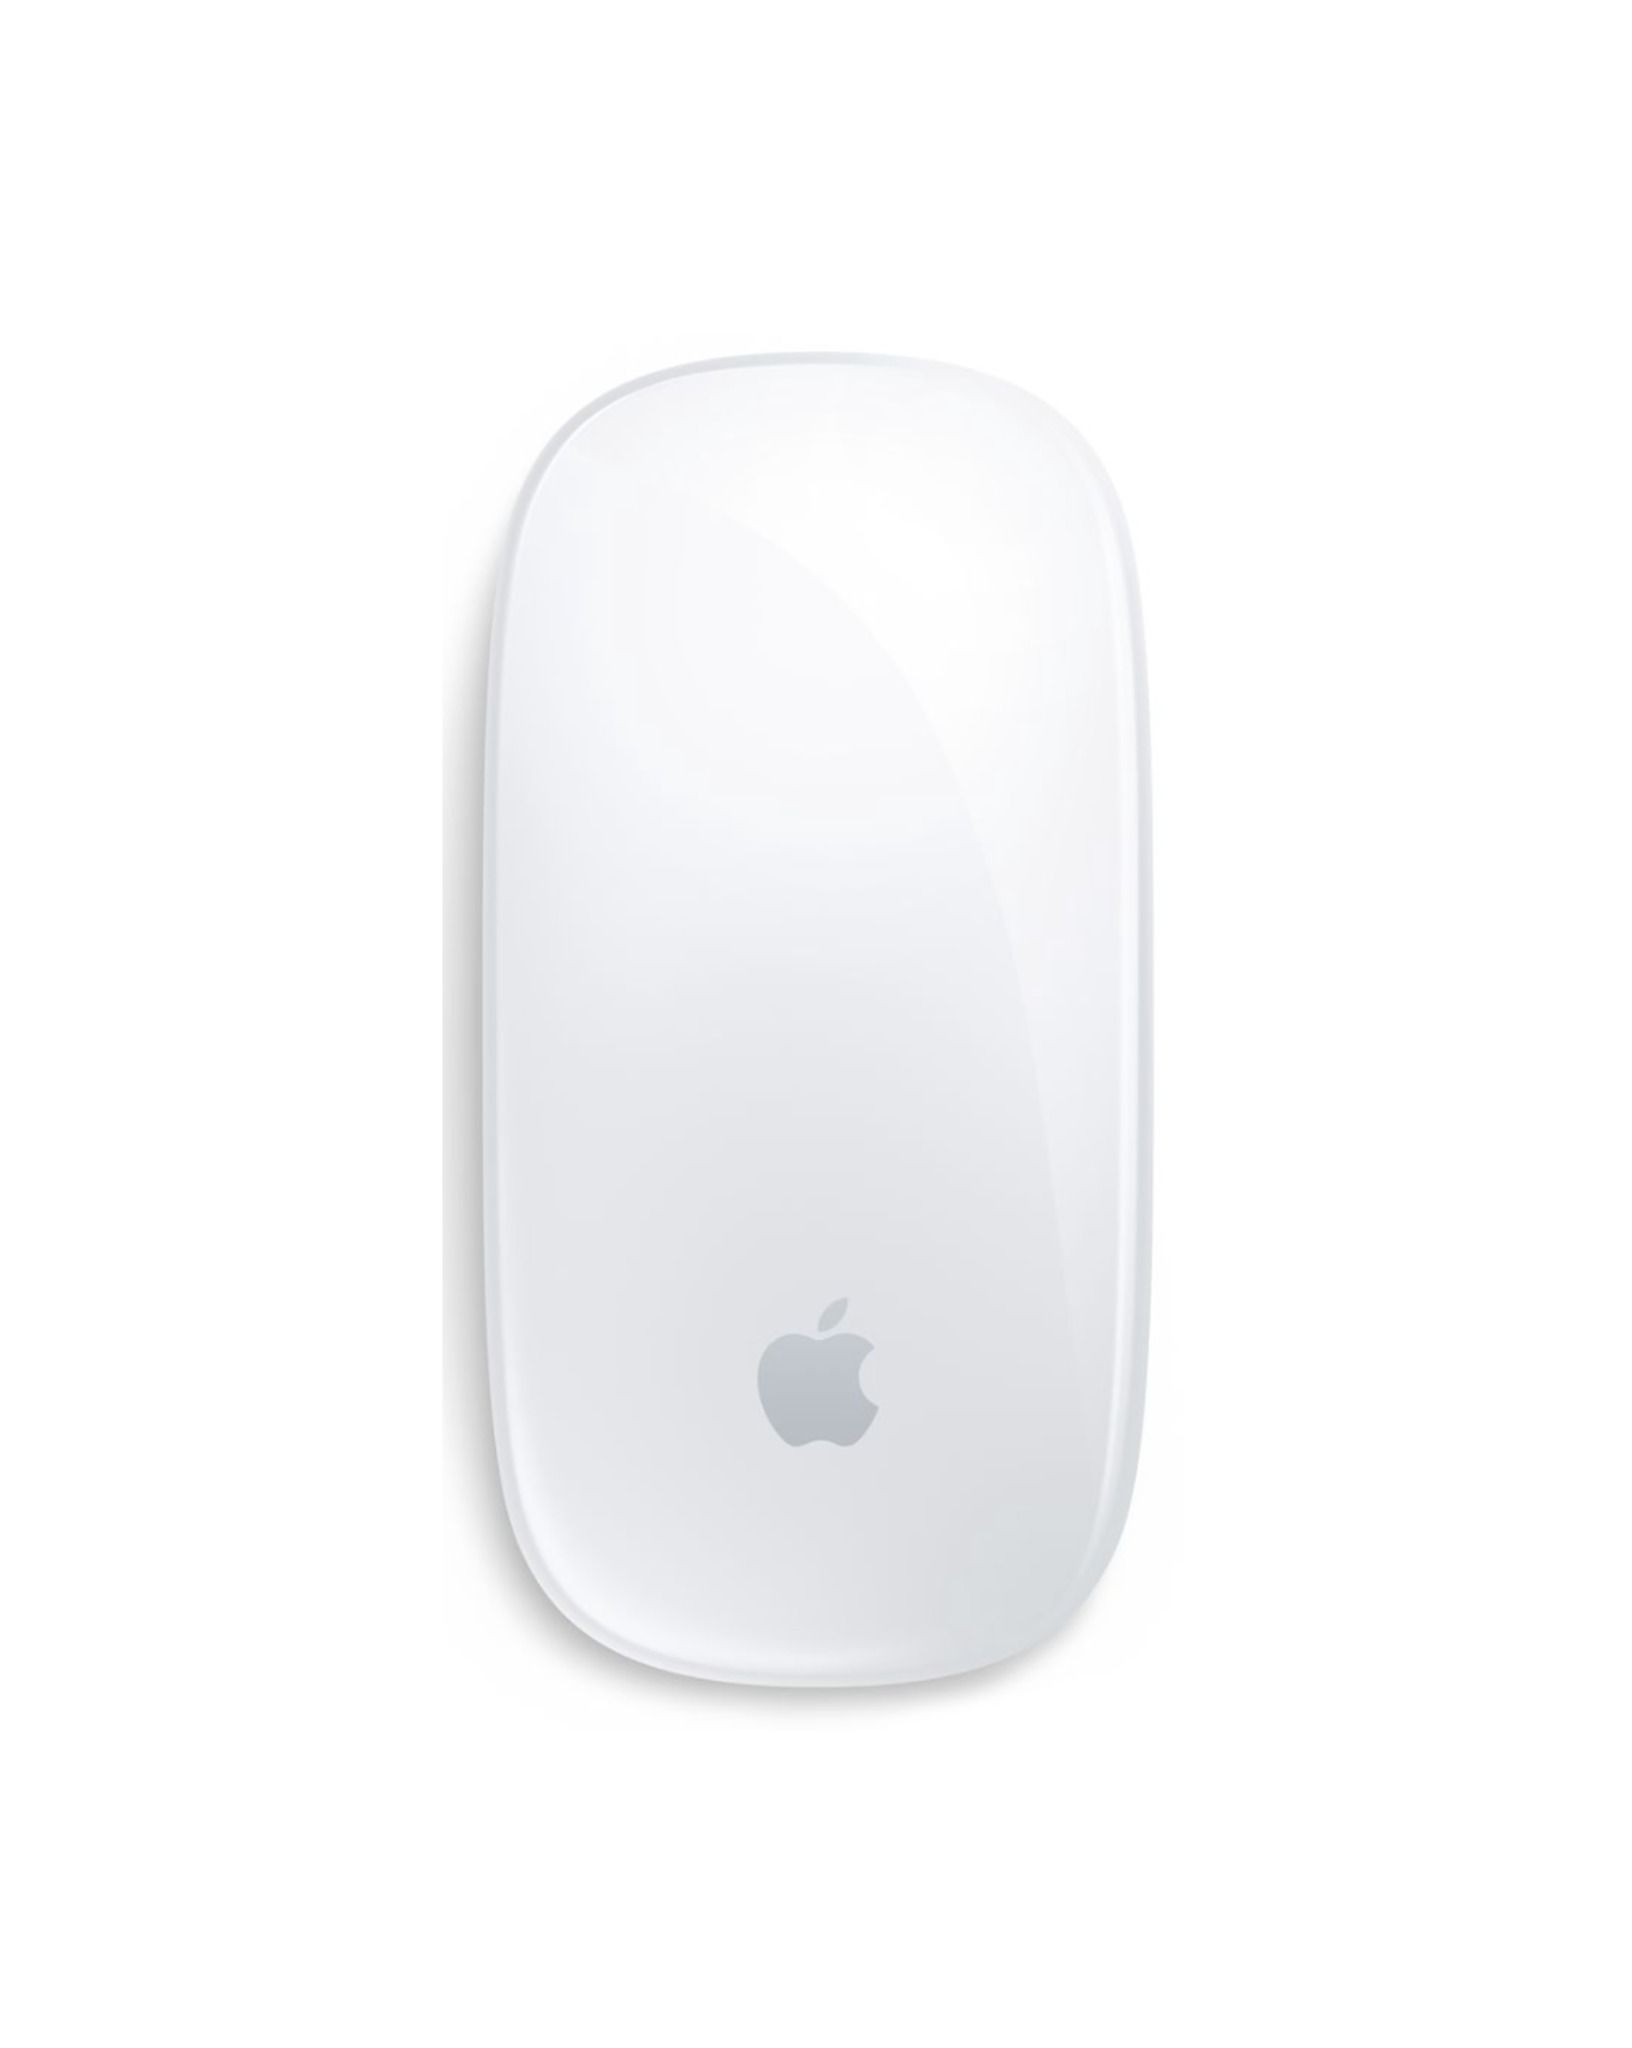 Magic Mouse 2 New Seal